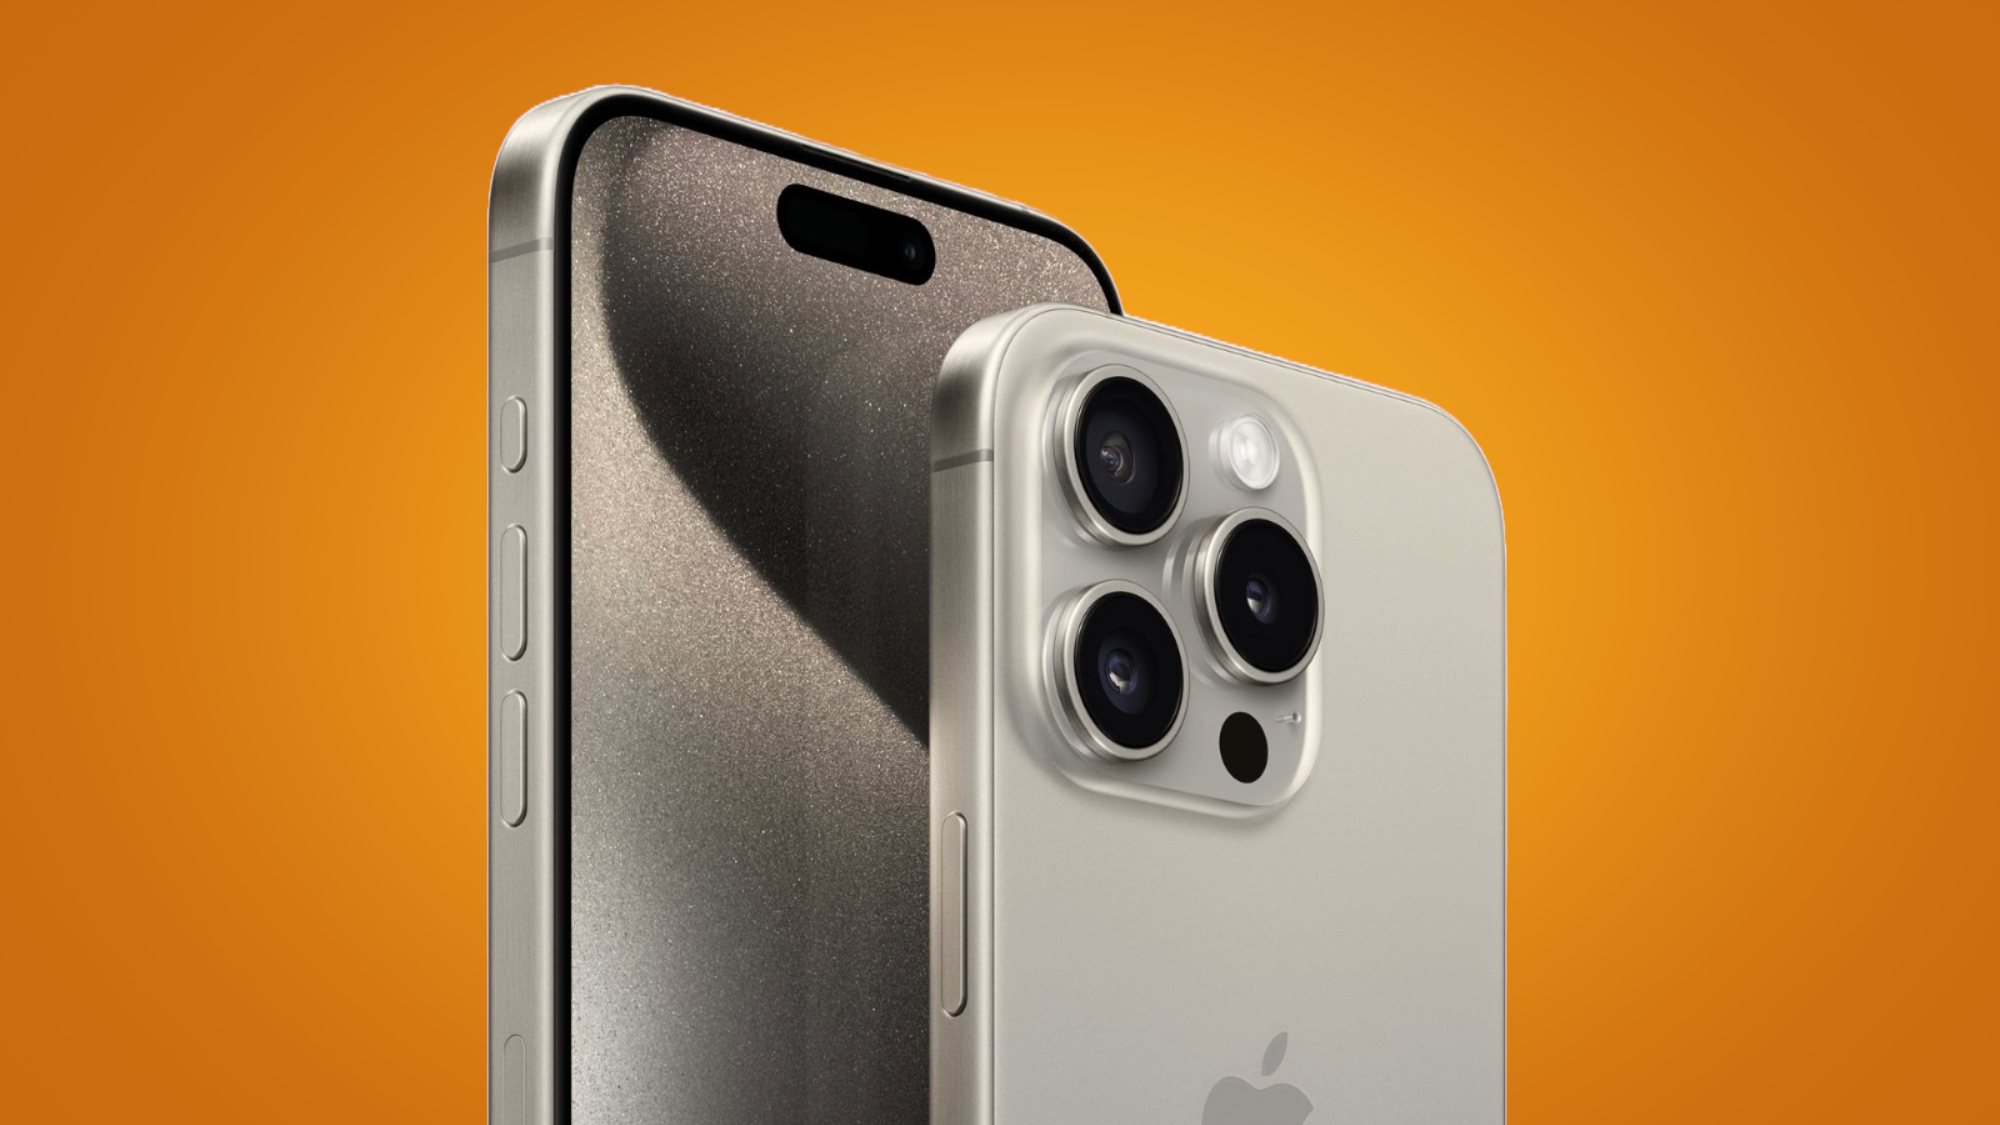 iPhone 15 Pro Max Again Tipped to Exclusively Feature Periscope